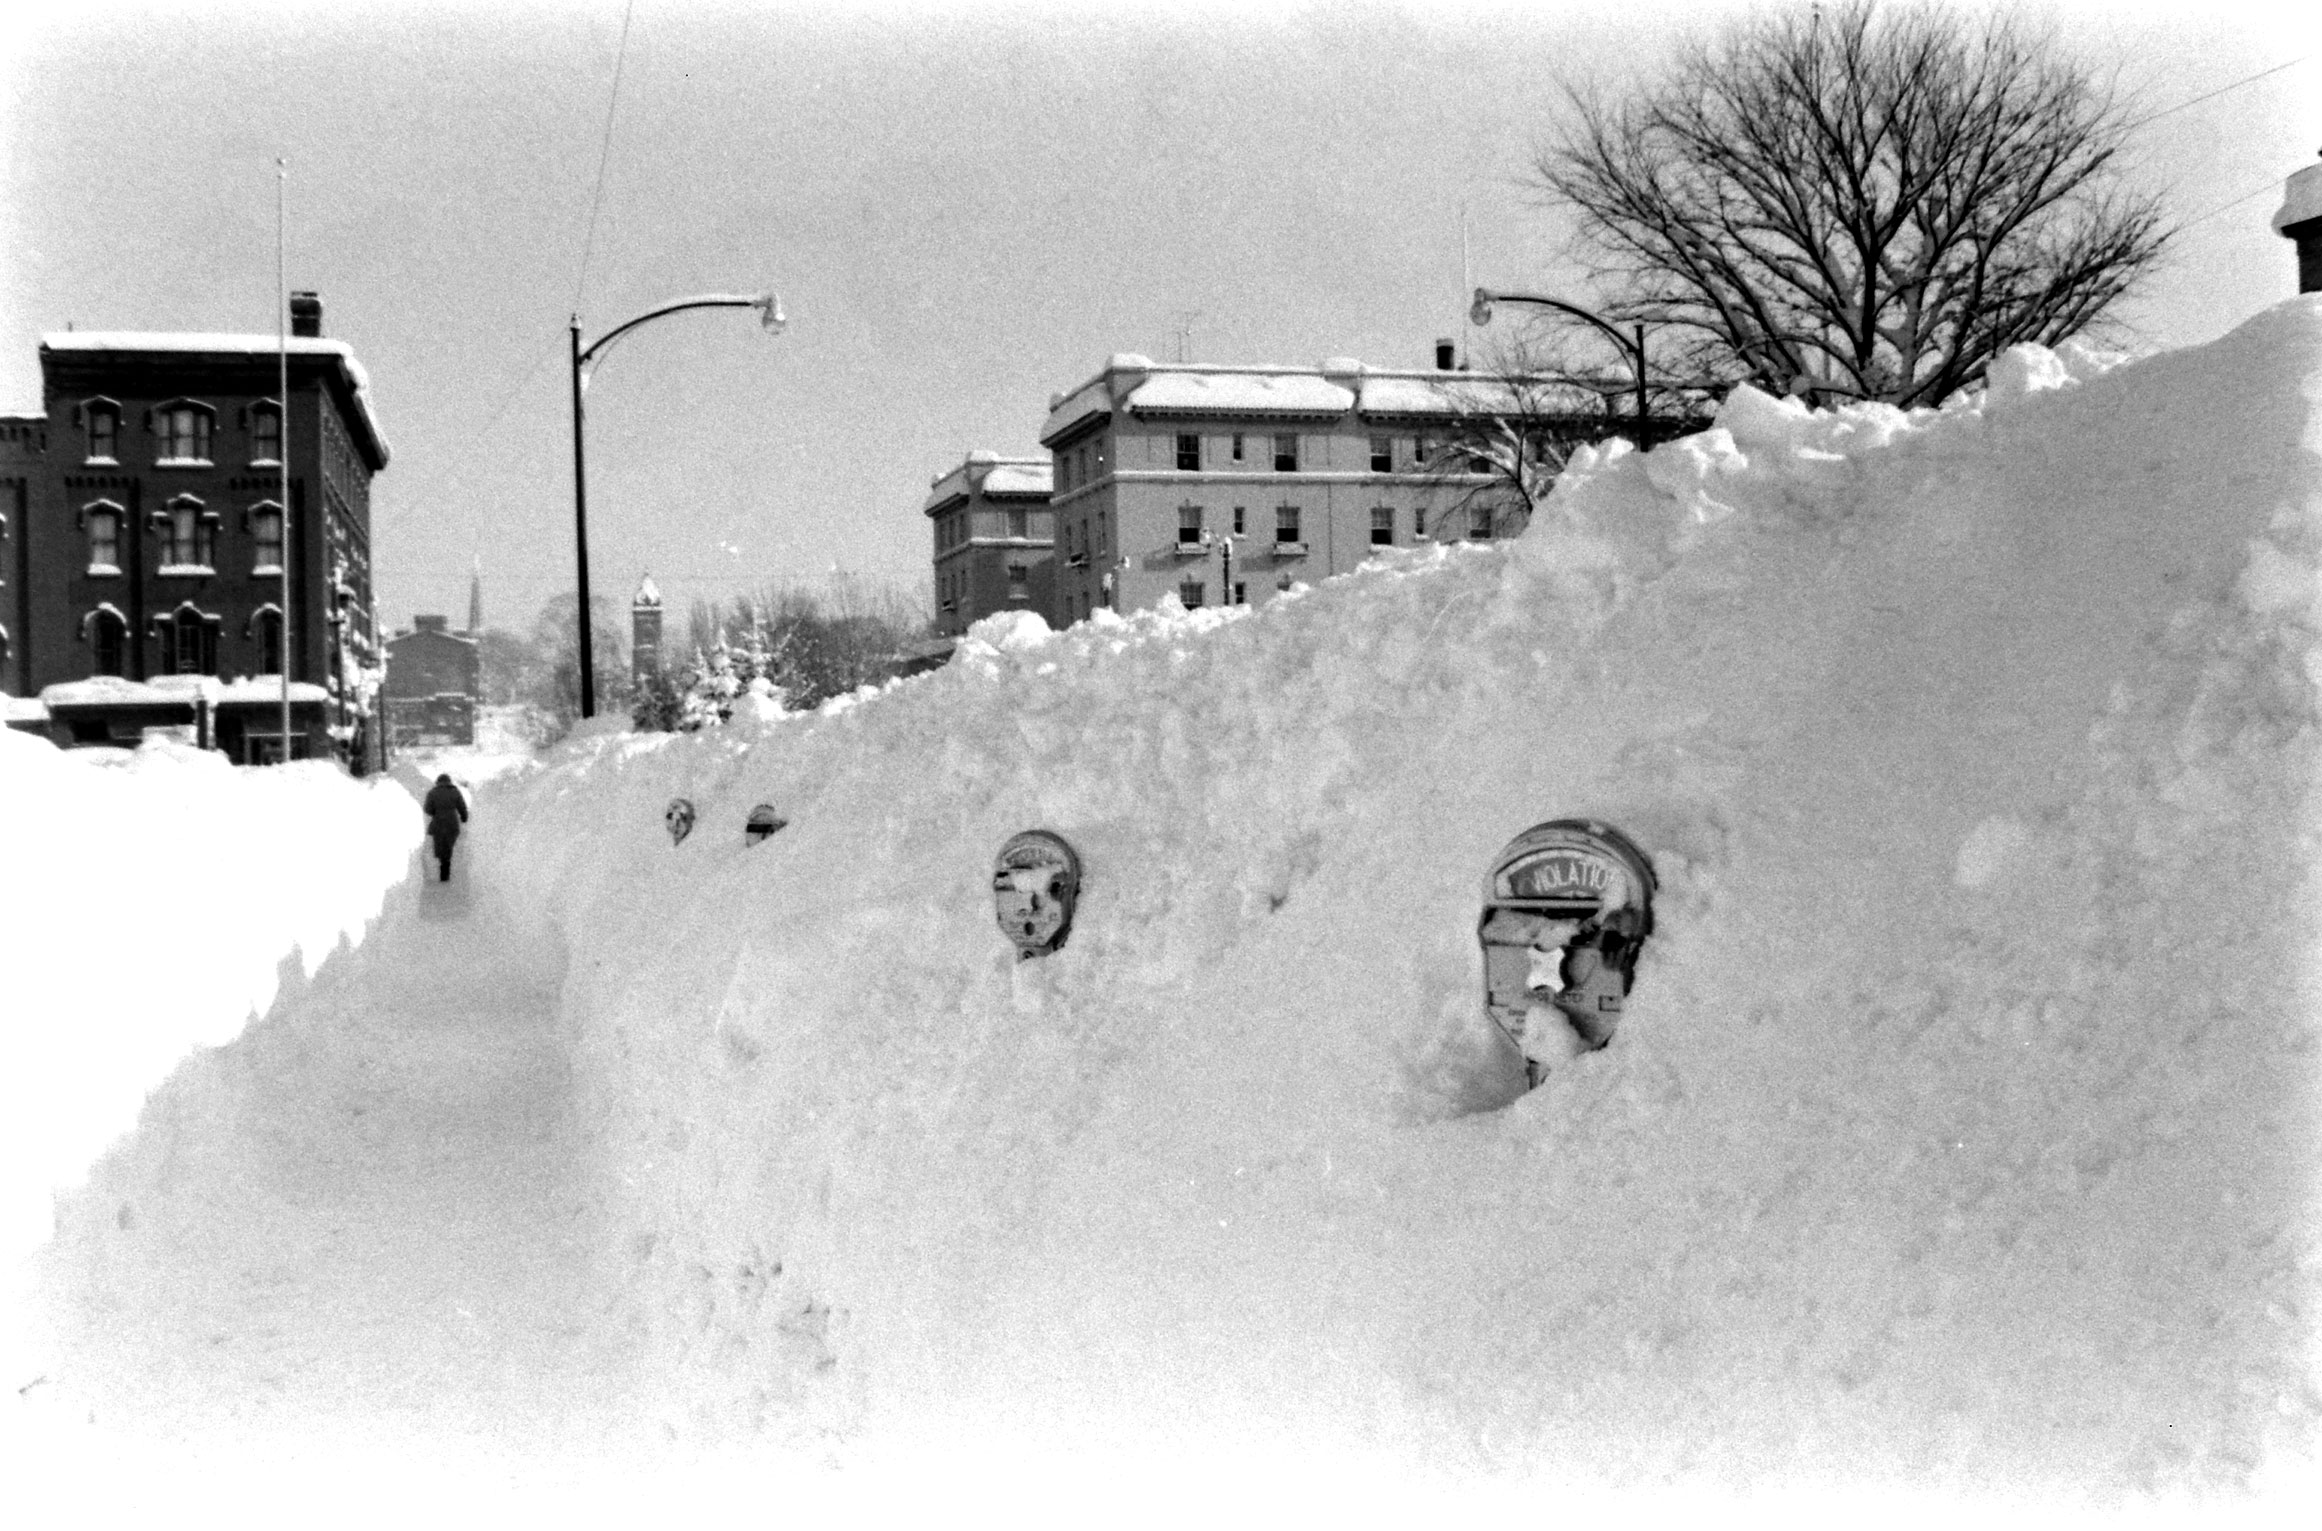 Scene from a snow storm in Oswego, New York, on December 1958 that dropped over 6 feet of snow.